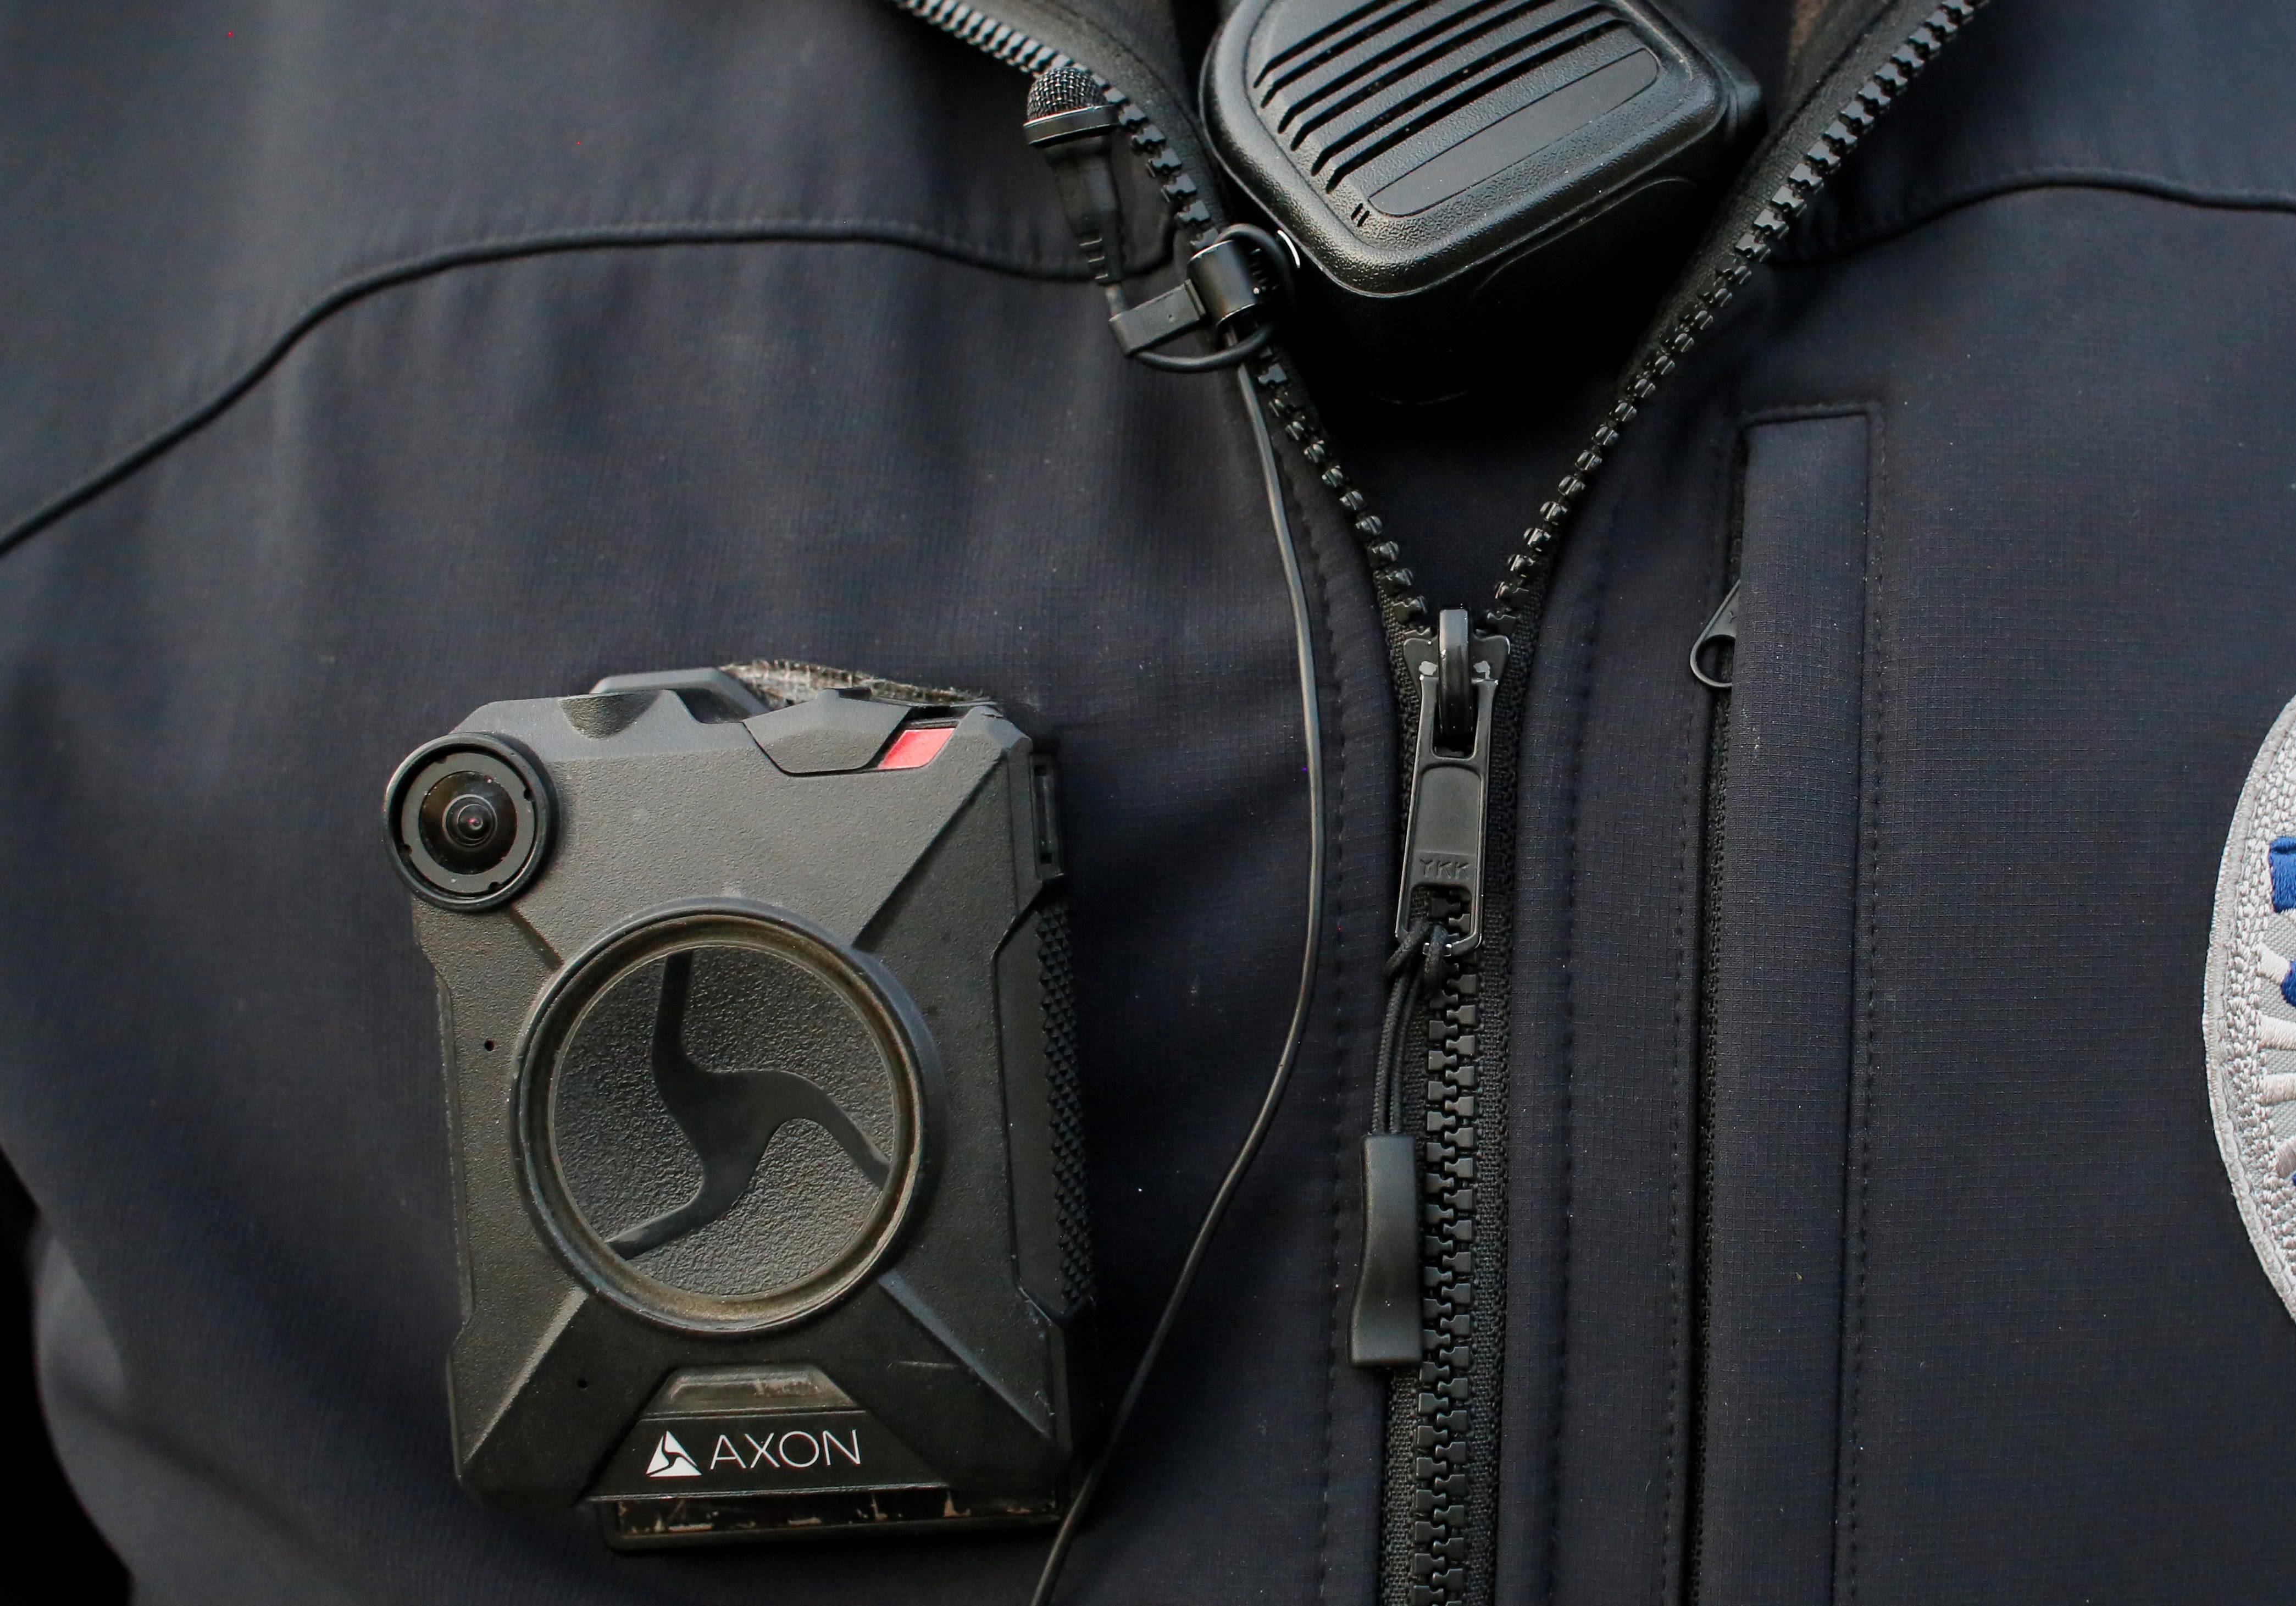 Fargo officers largely accept body cameras, more so than other cities of its size, NDSU study finds